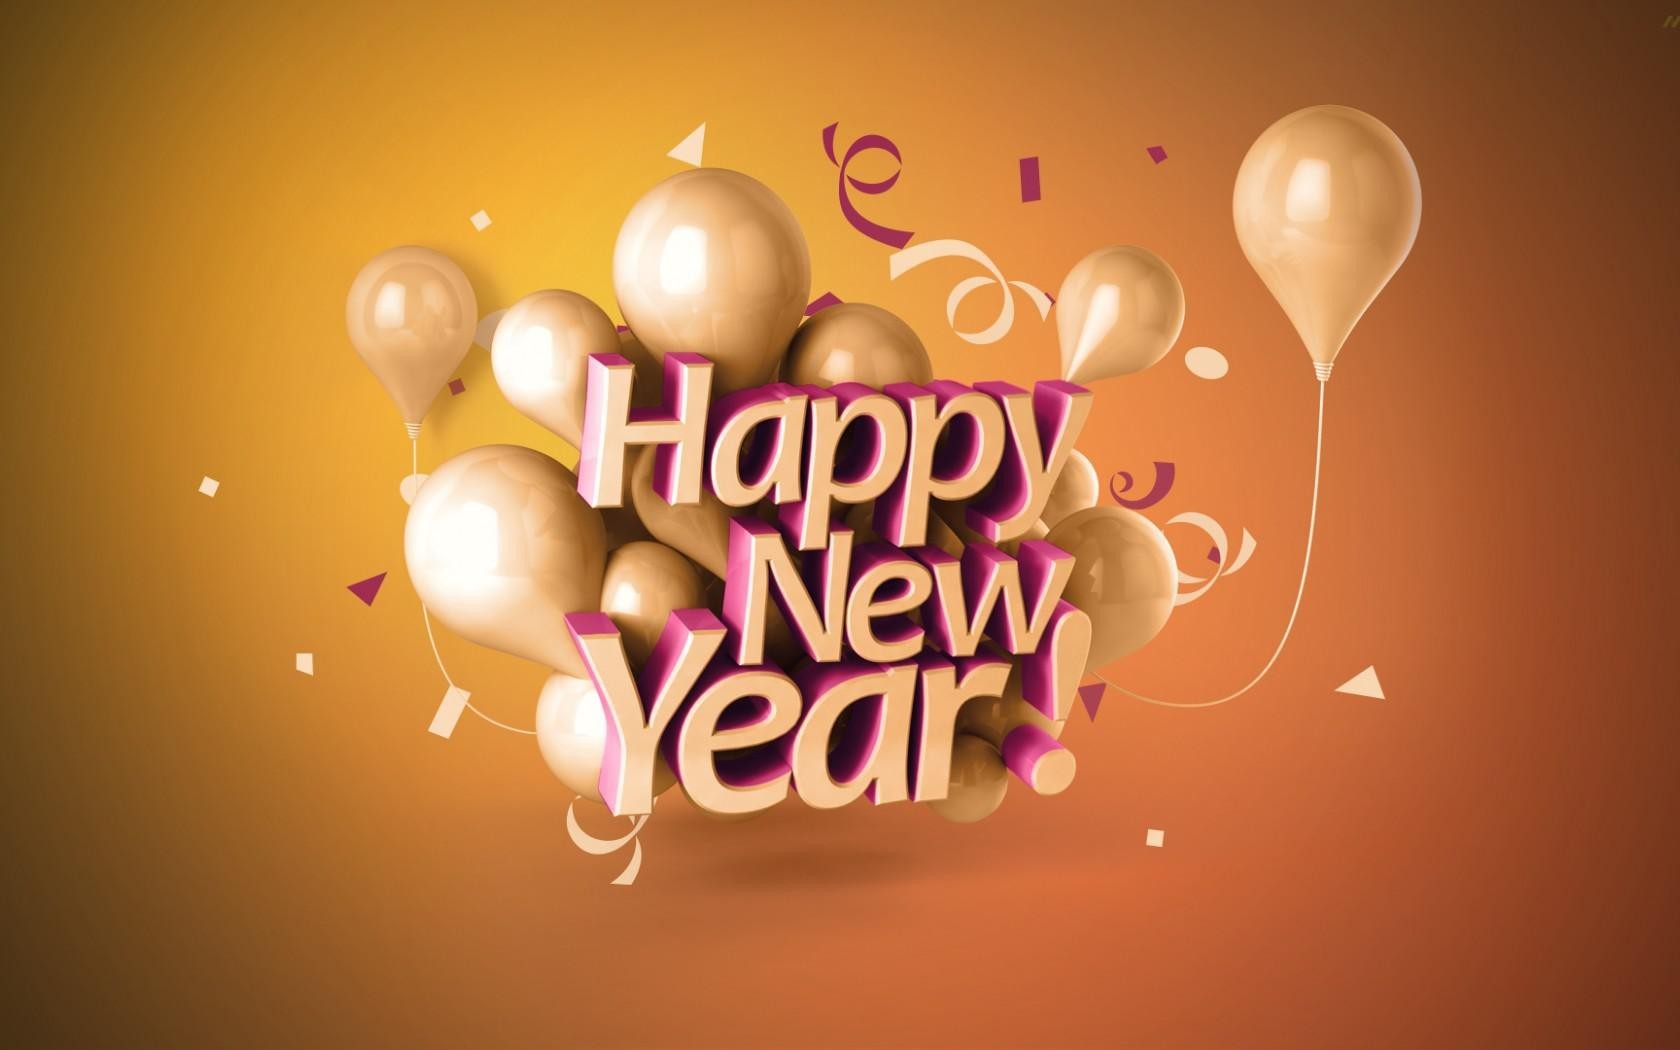 Cute Happy New Year Greeting Wishes Whatsapp Cover Screensavers Free Download